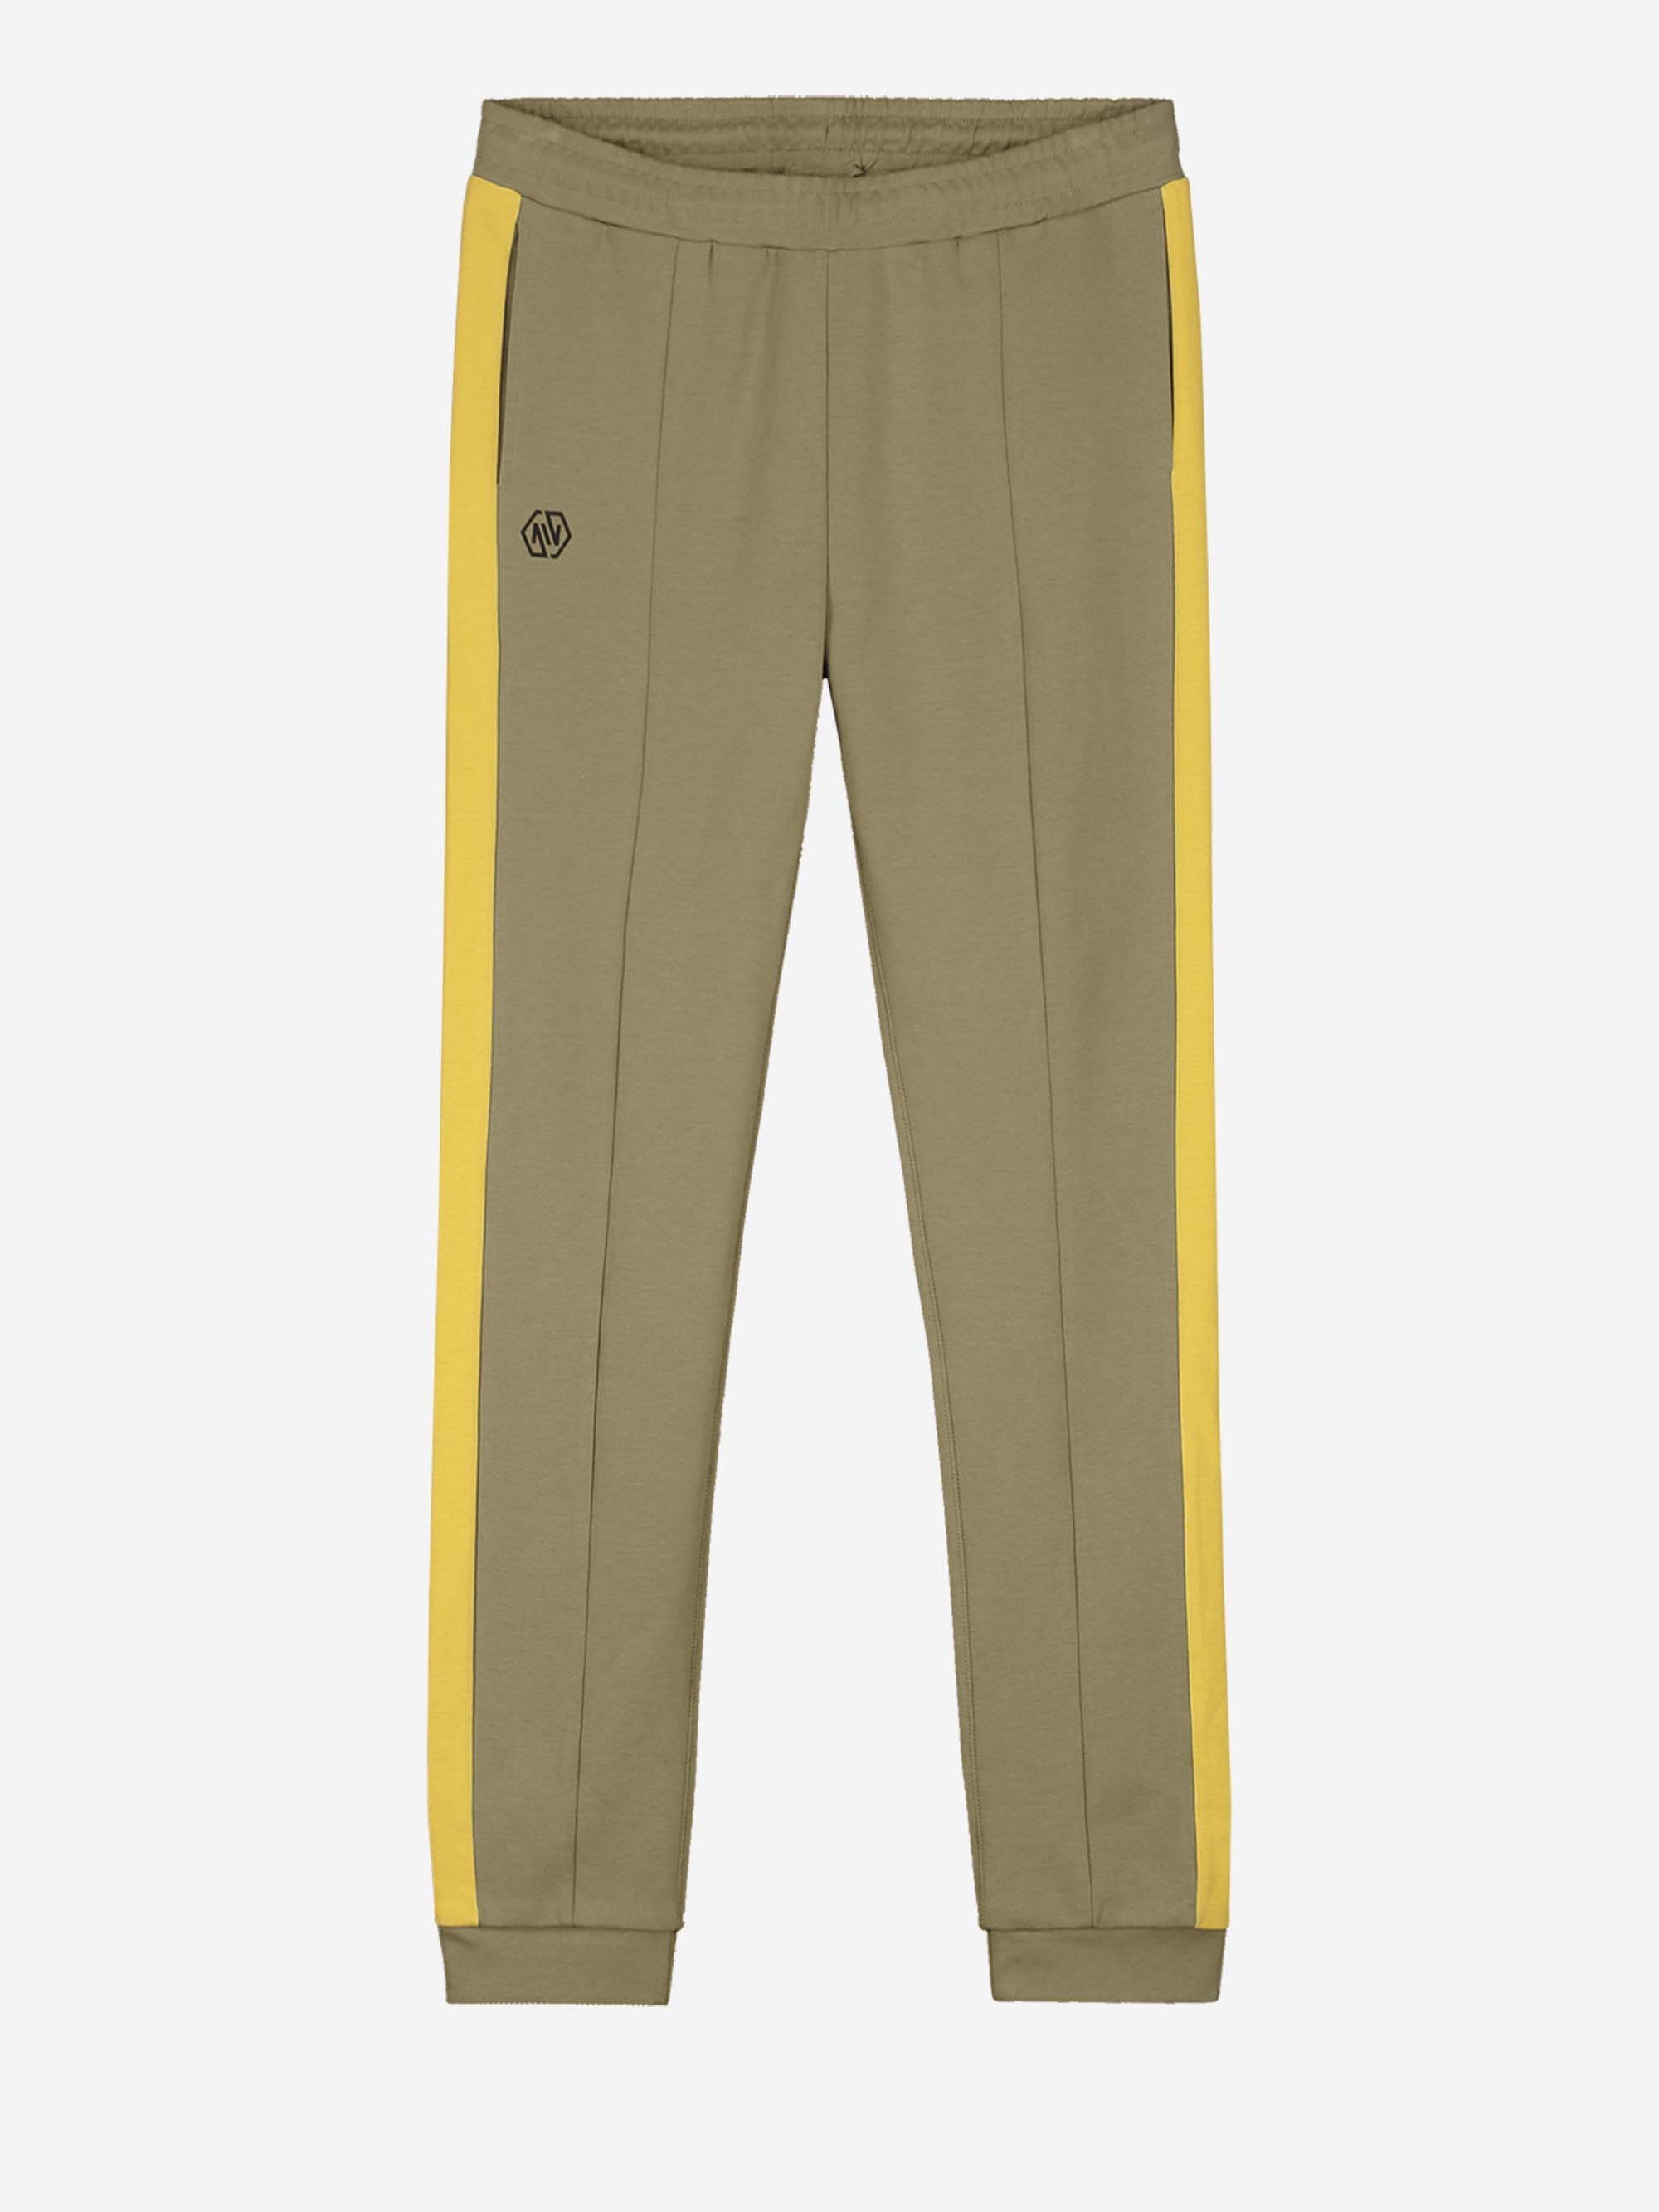 Fitted sweatpants with zipper pocket 